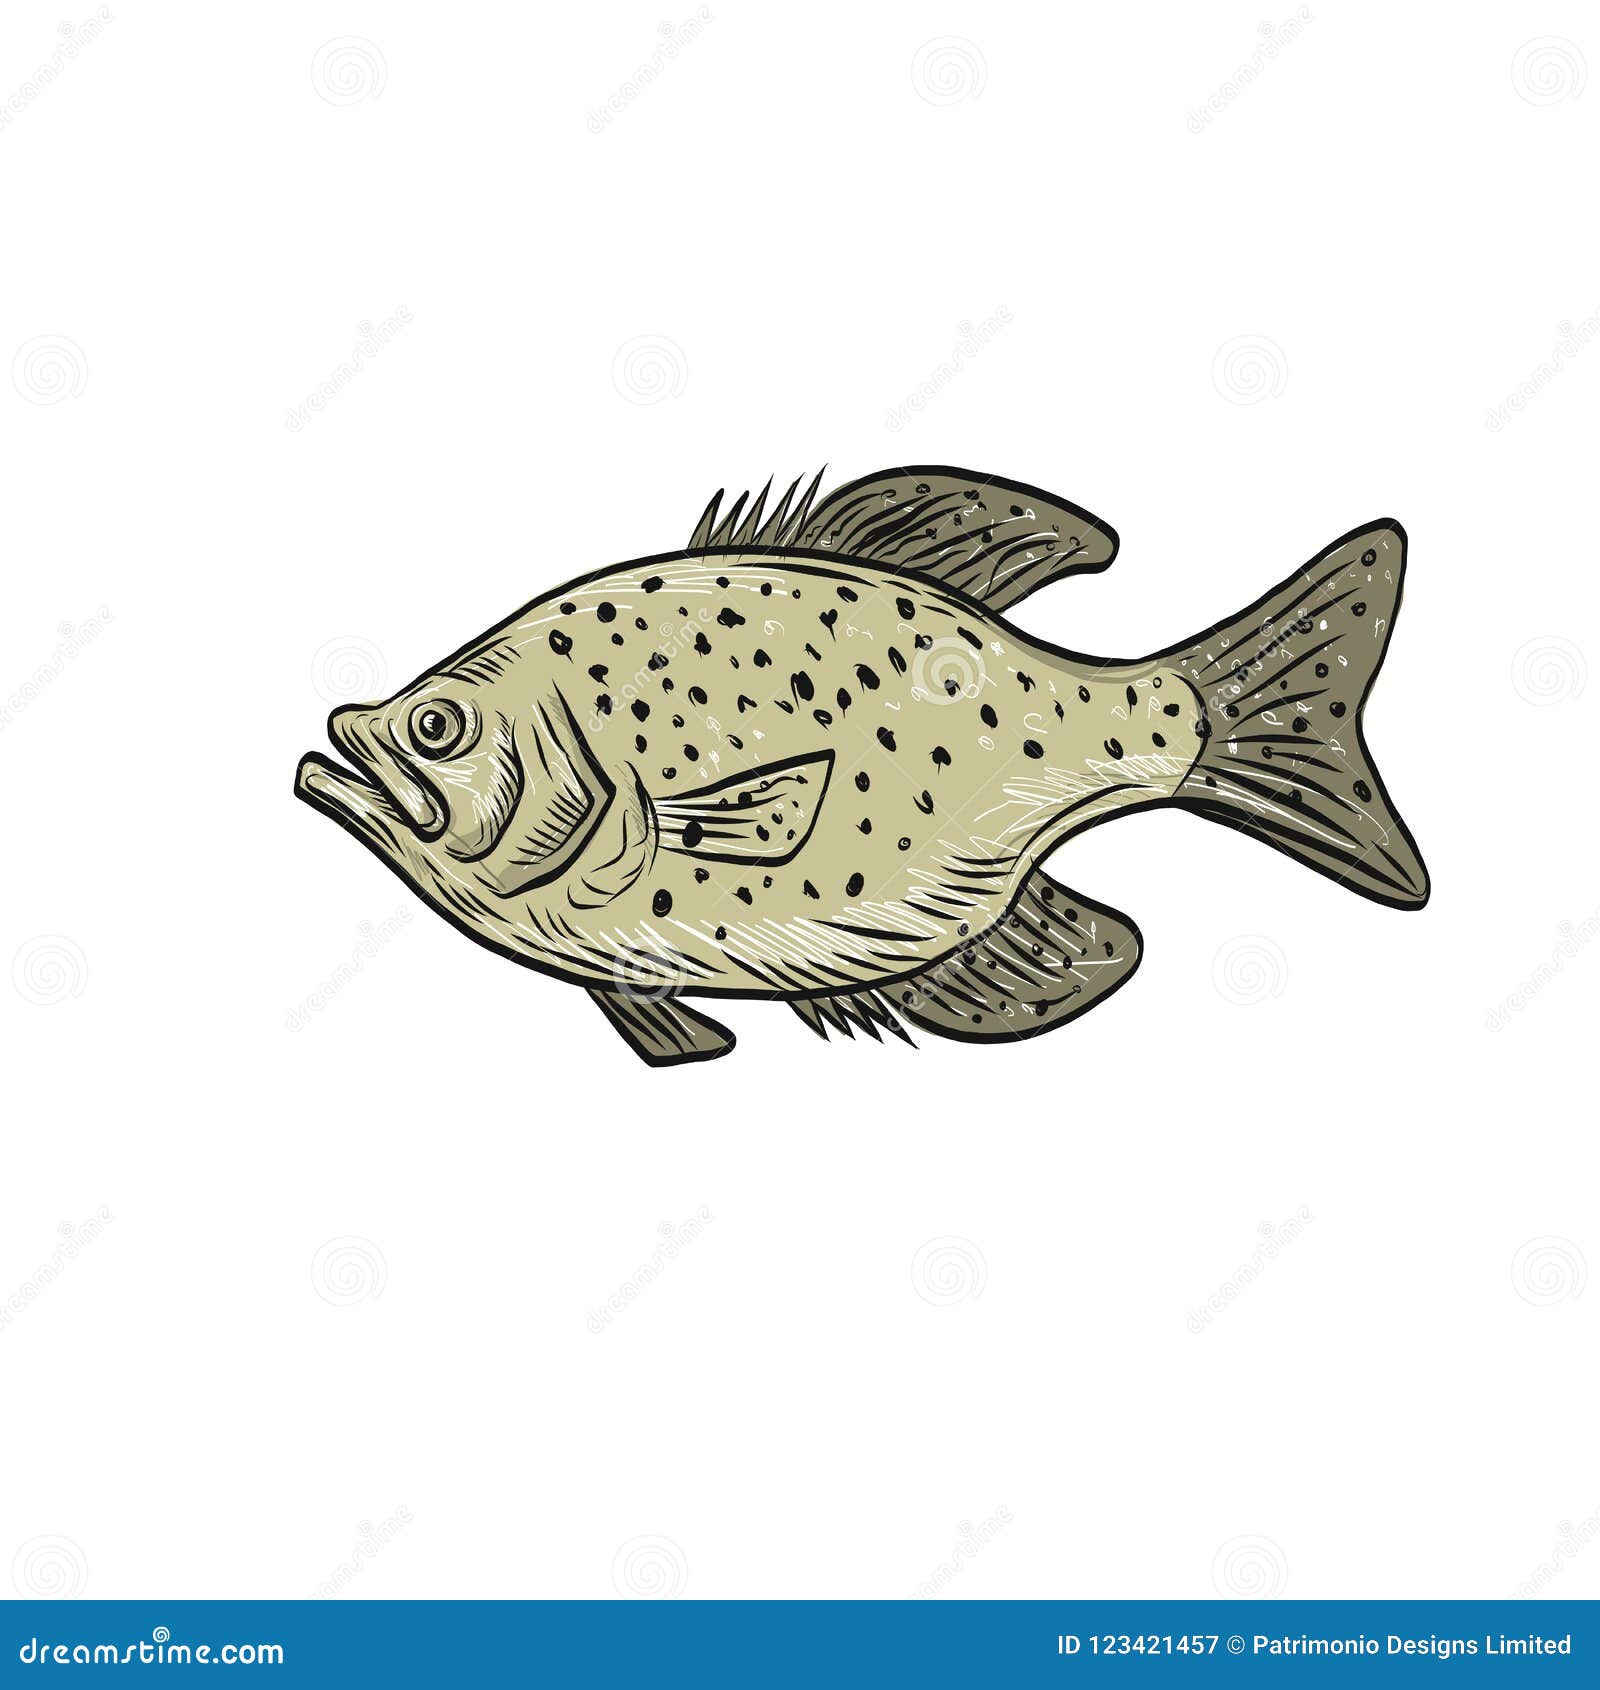 https://thumbs.dreamstime.com/z/drawing-sketch-style-illustration-crappie-fish-papermouths-strawberry-bass-speckled-bass-specks-speckled-perch-crappie-bass-123421457.jpg